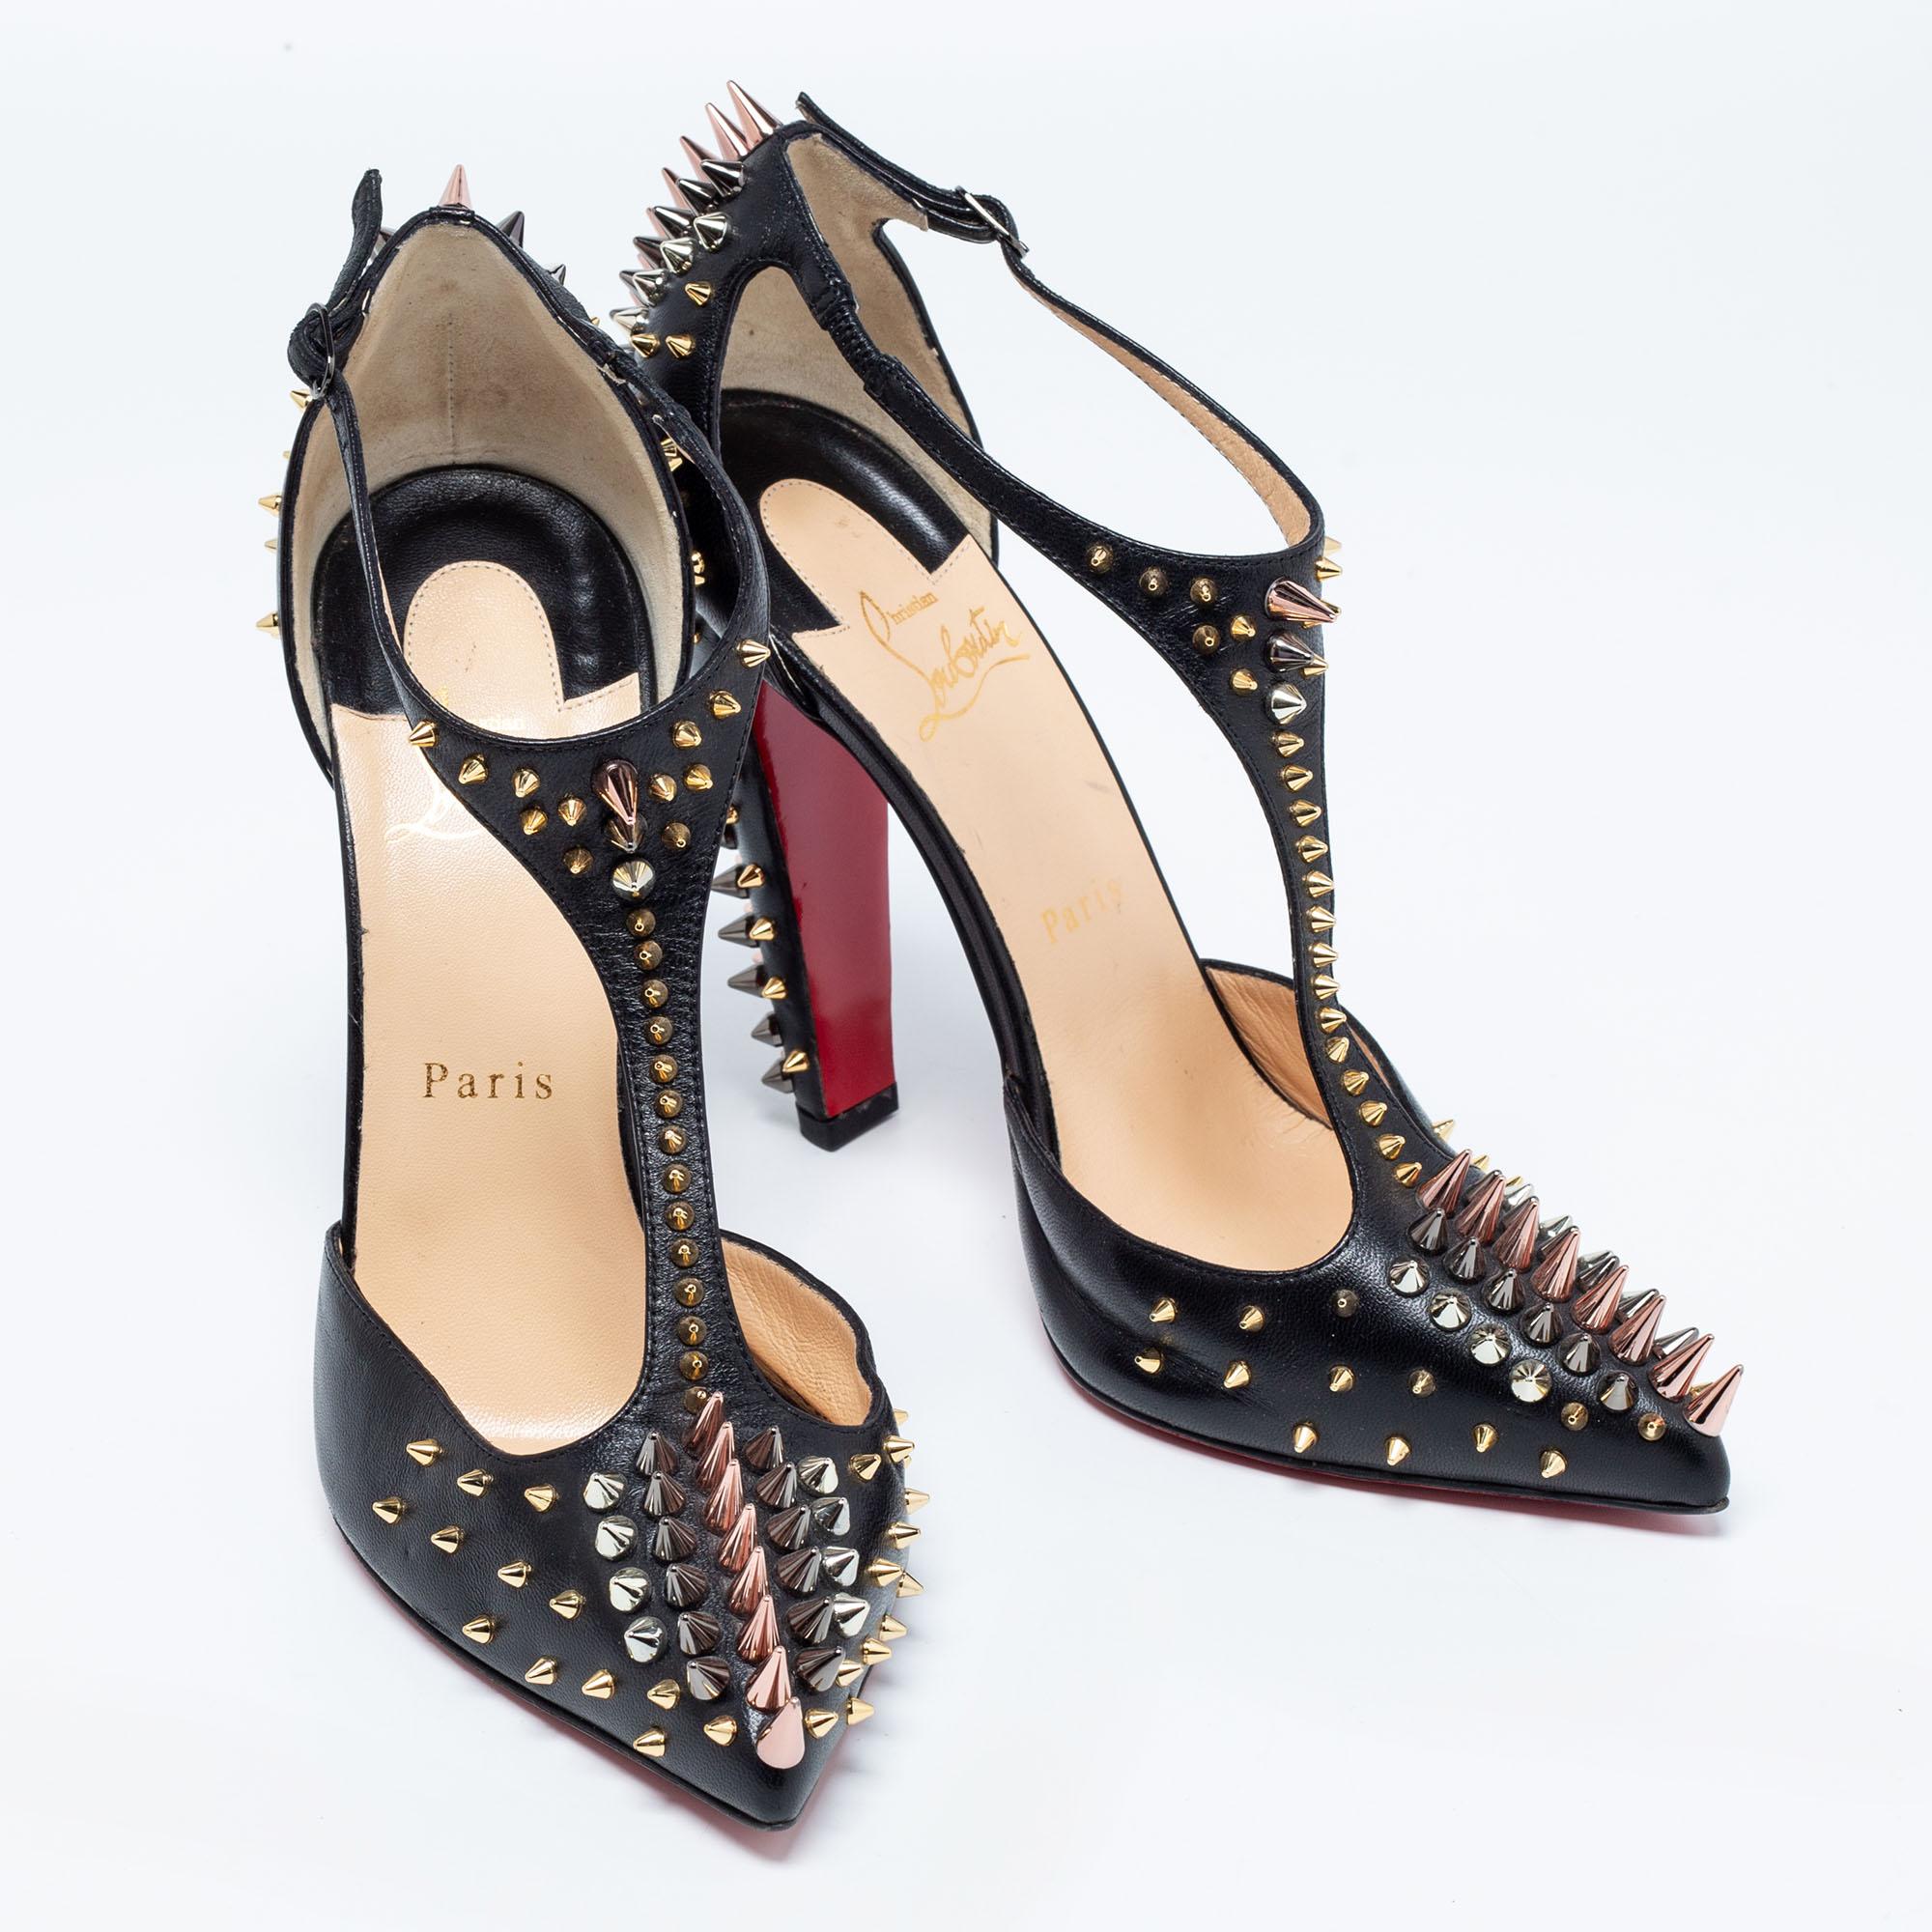 Christian Louboutin Black Leather Goldostrap Spiked Pumps Size 39.5 1